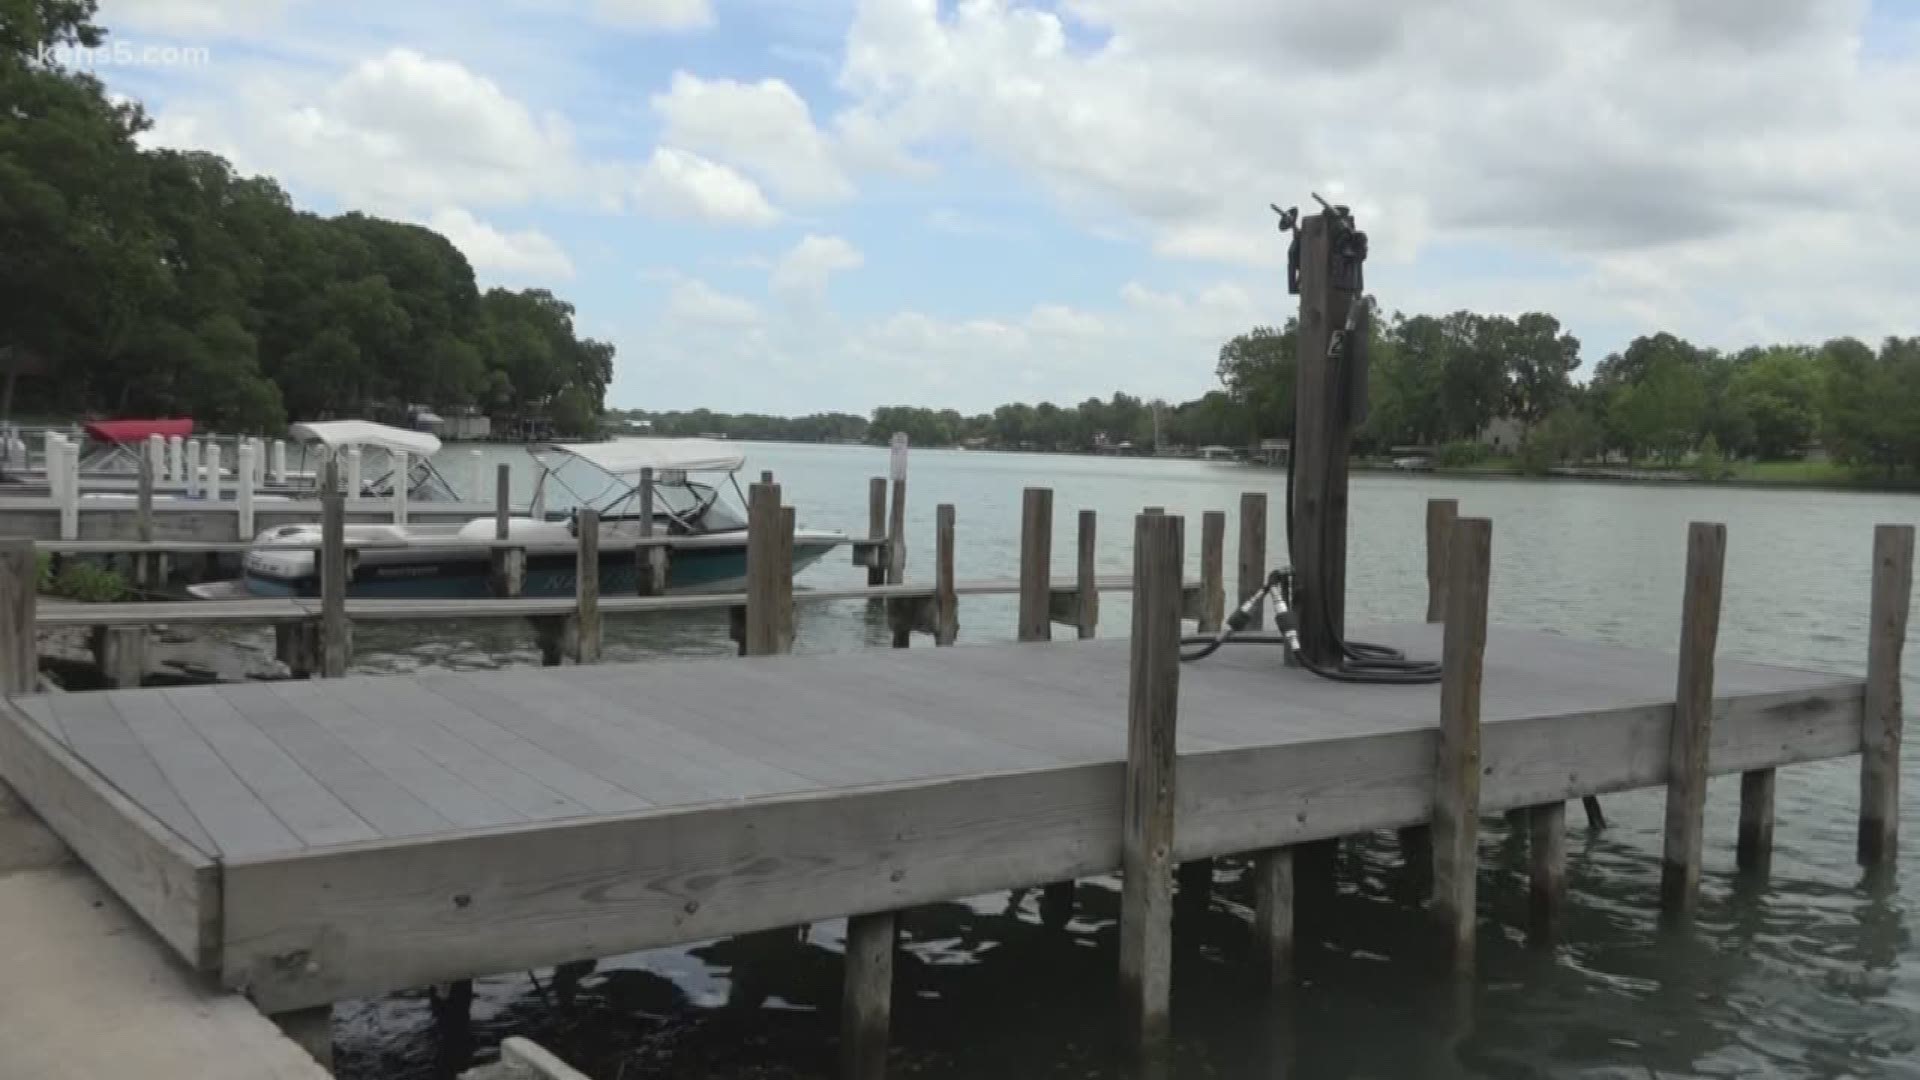 Property owners along Lake McQueeney and Placid will now have their day in court, hoping to put a stop to the Guadalupe Blanco River Authority’s plans to drain four lakes under their authority.